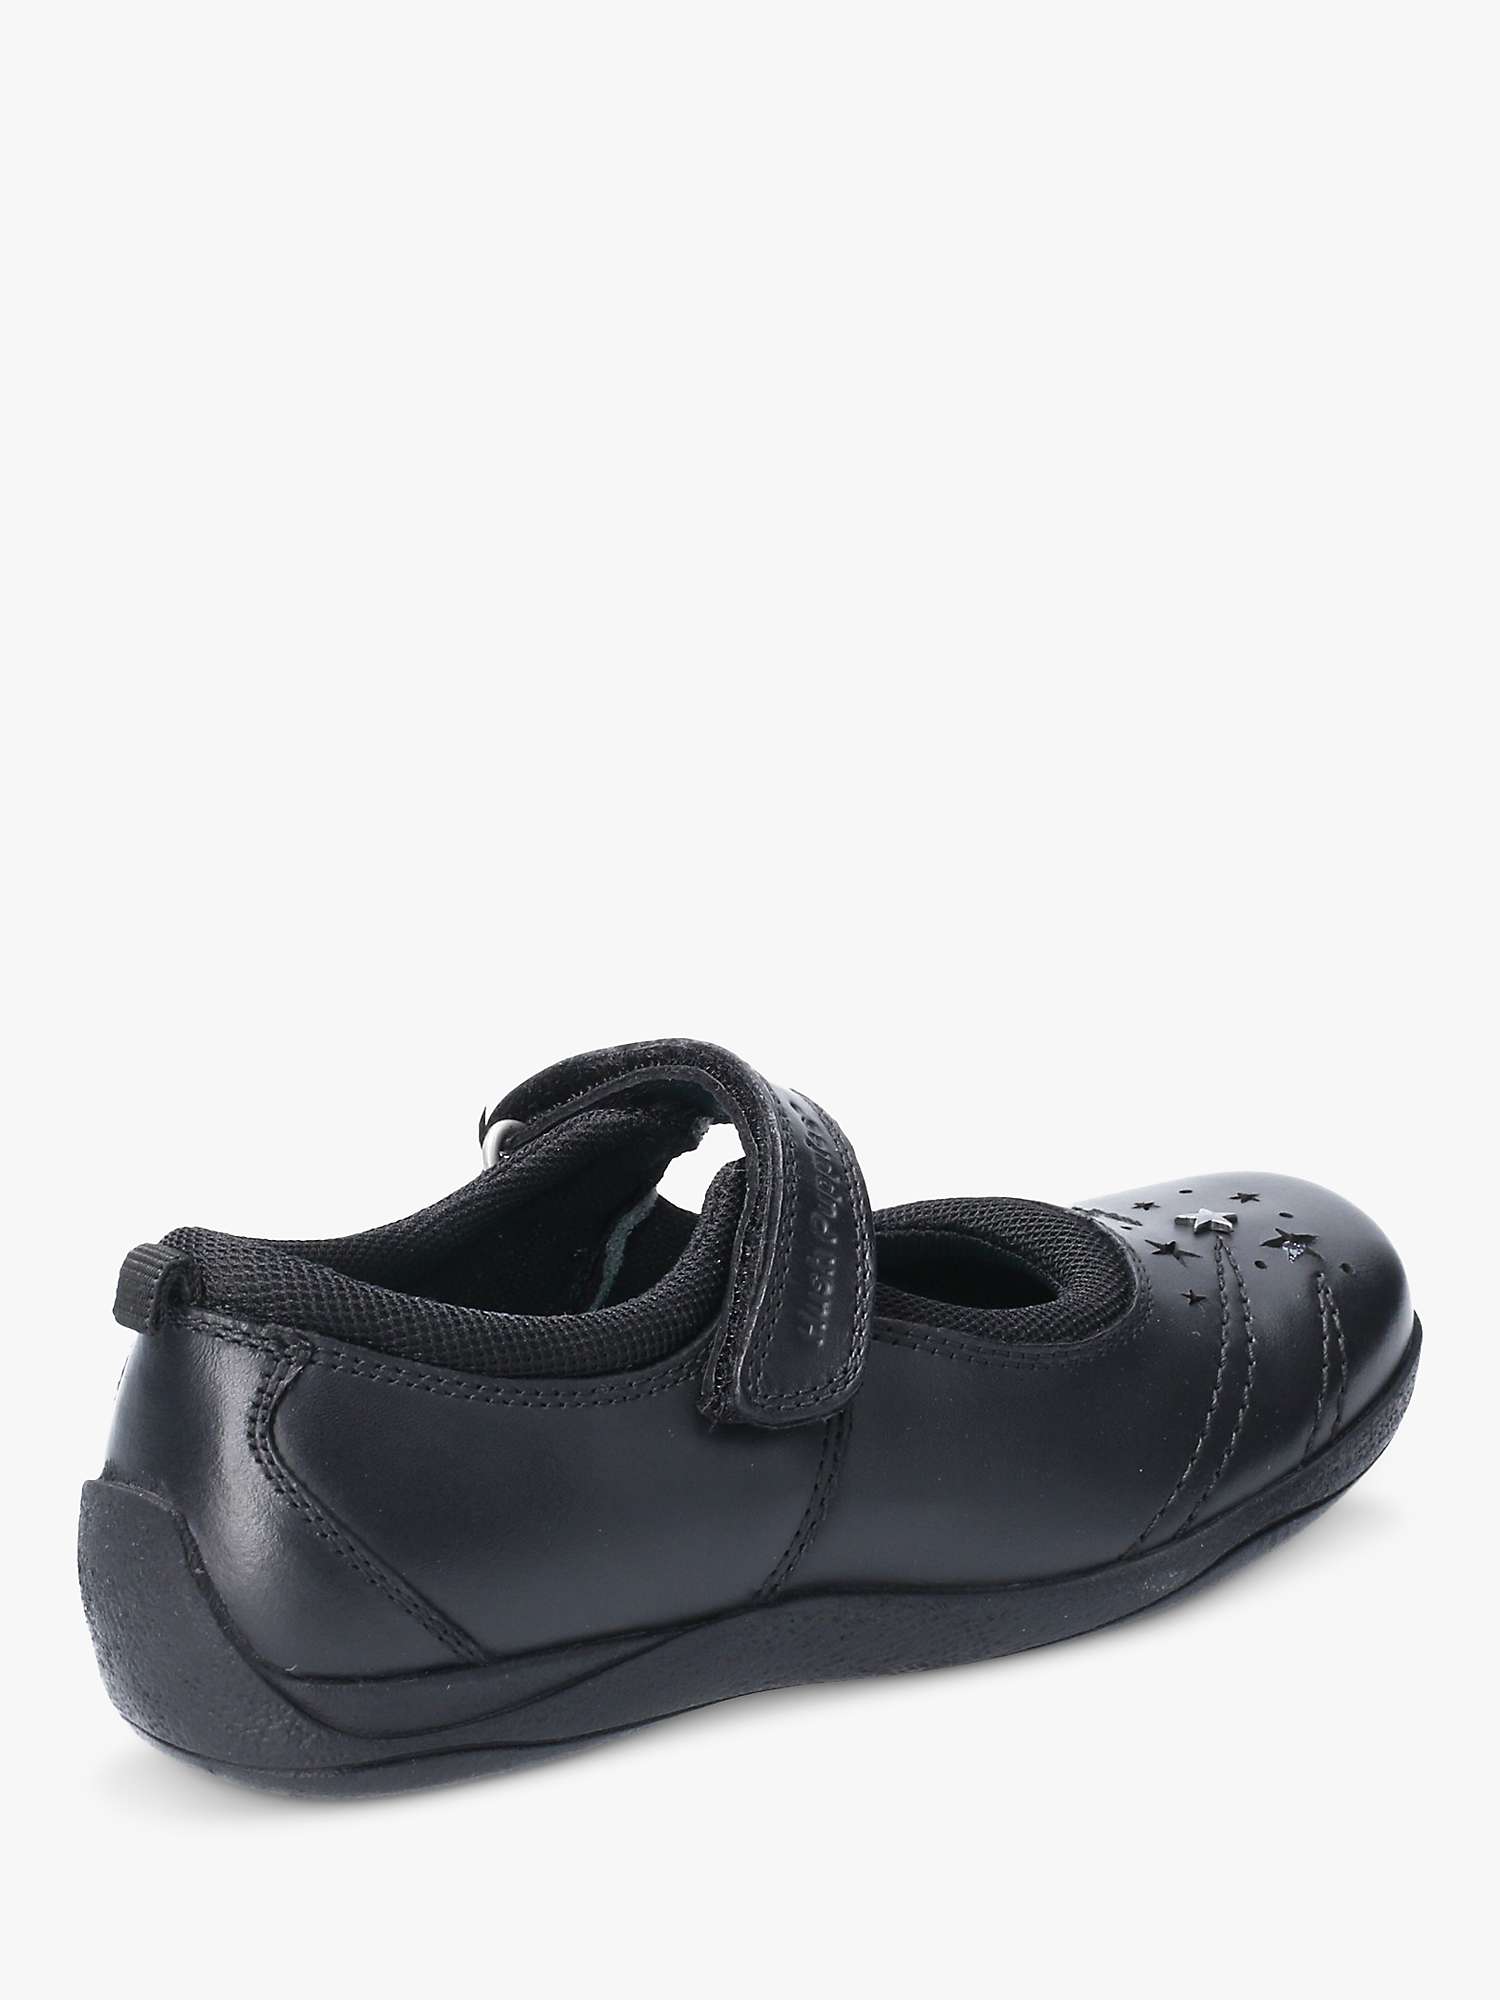 Buy Hush Puppies Kids' Amber Junior Leather Mary Jane Shoes, Black Online at johnlewis.com